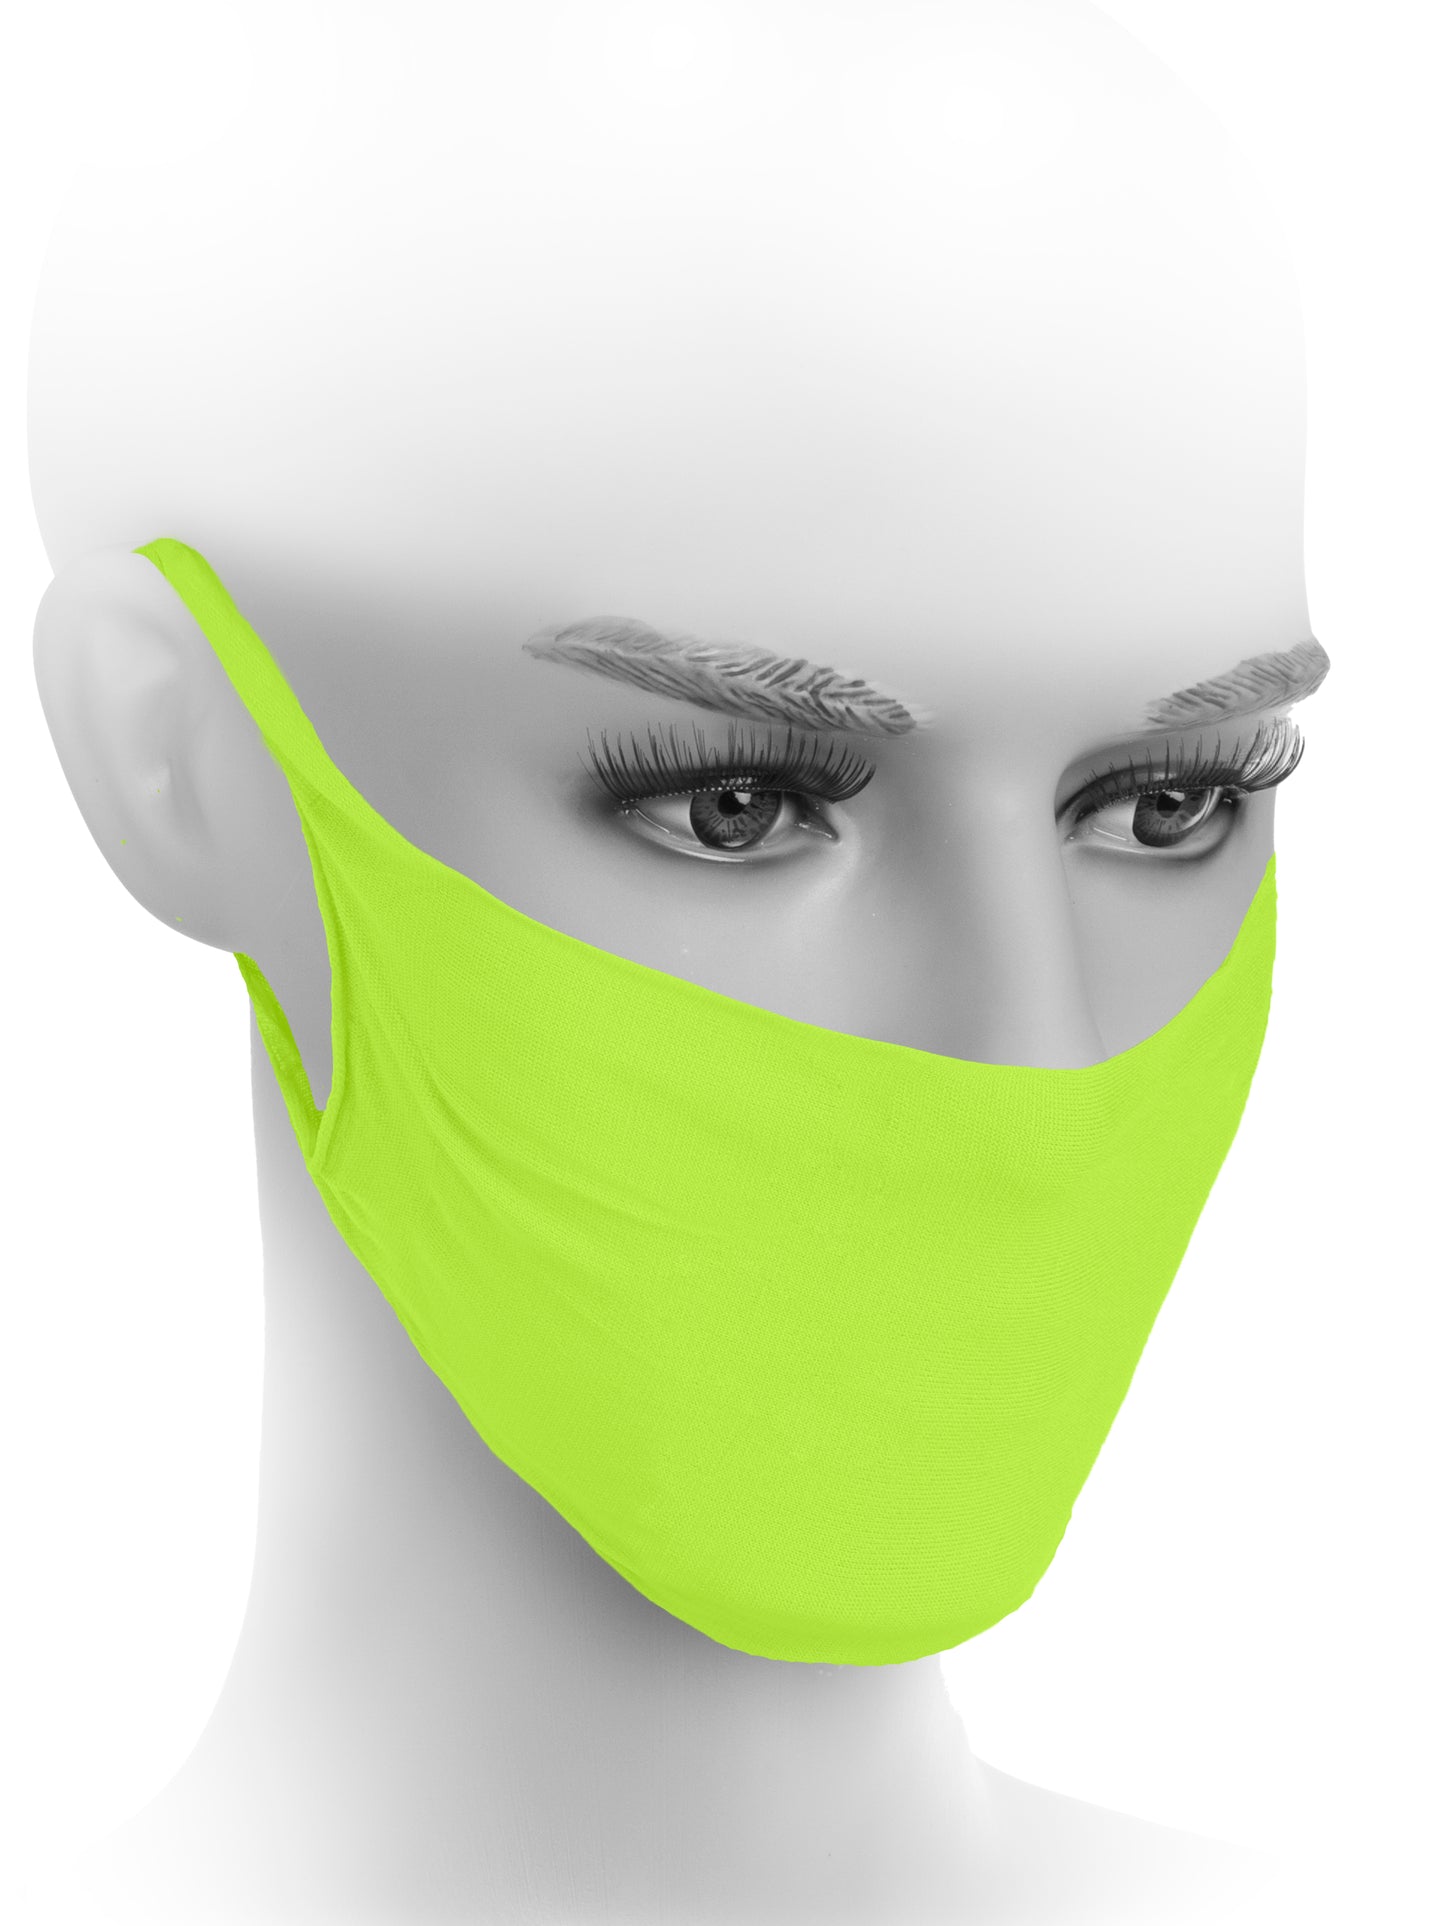 Fiore Hygiene Face Mask M0001 - face covering in bright neon yellow